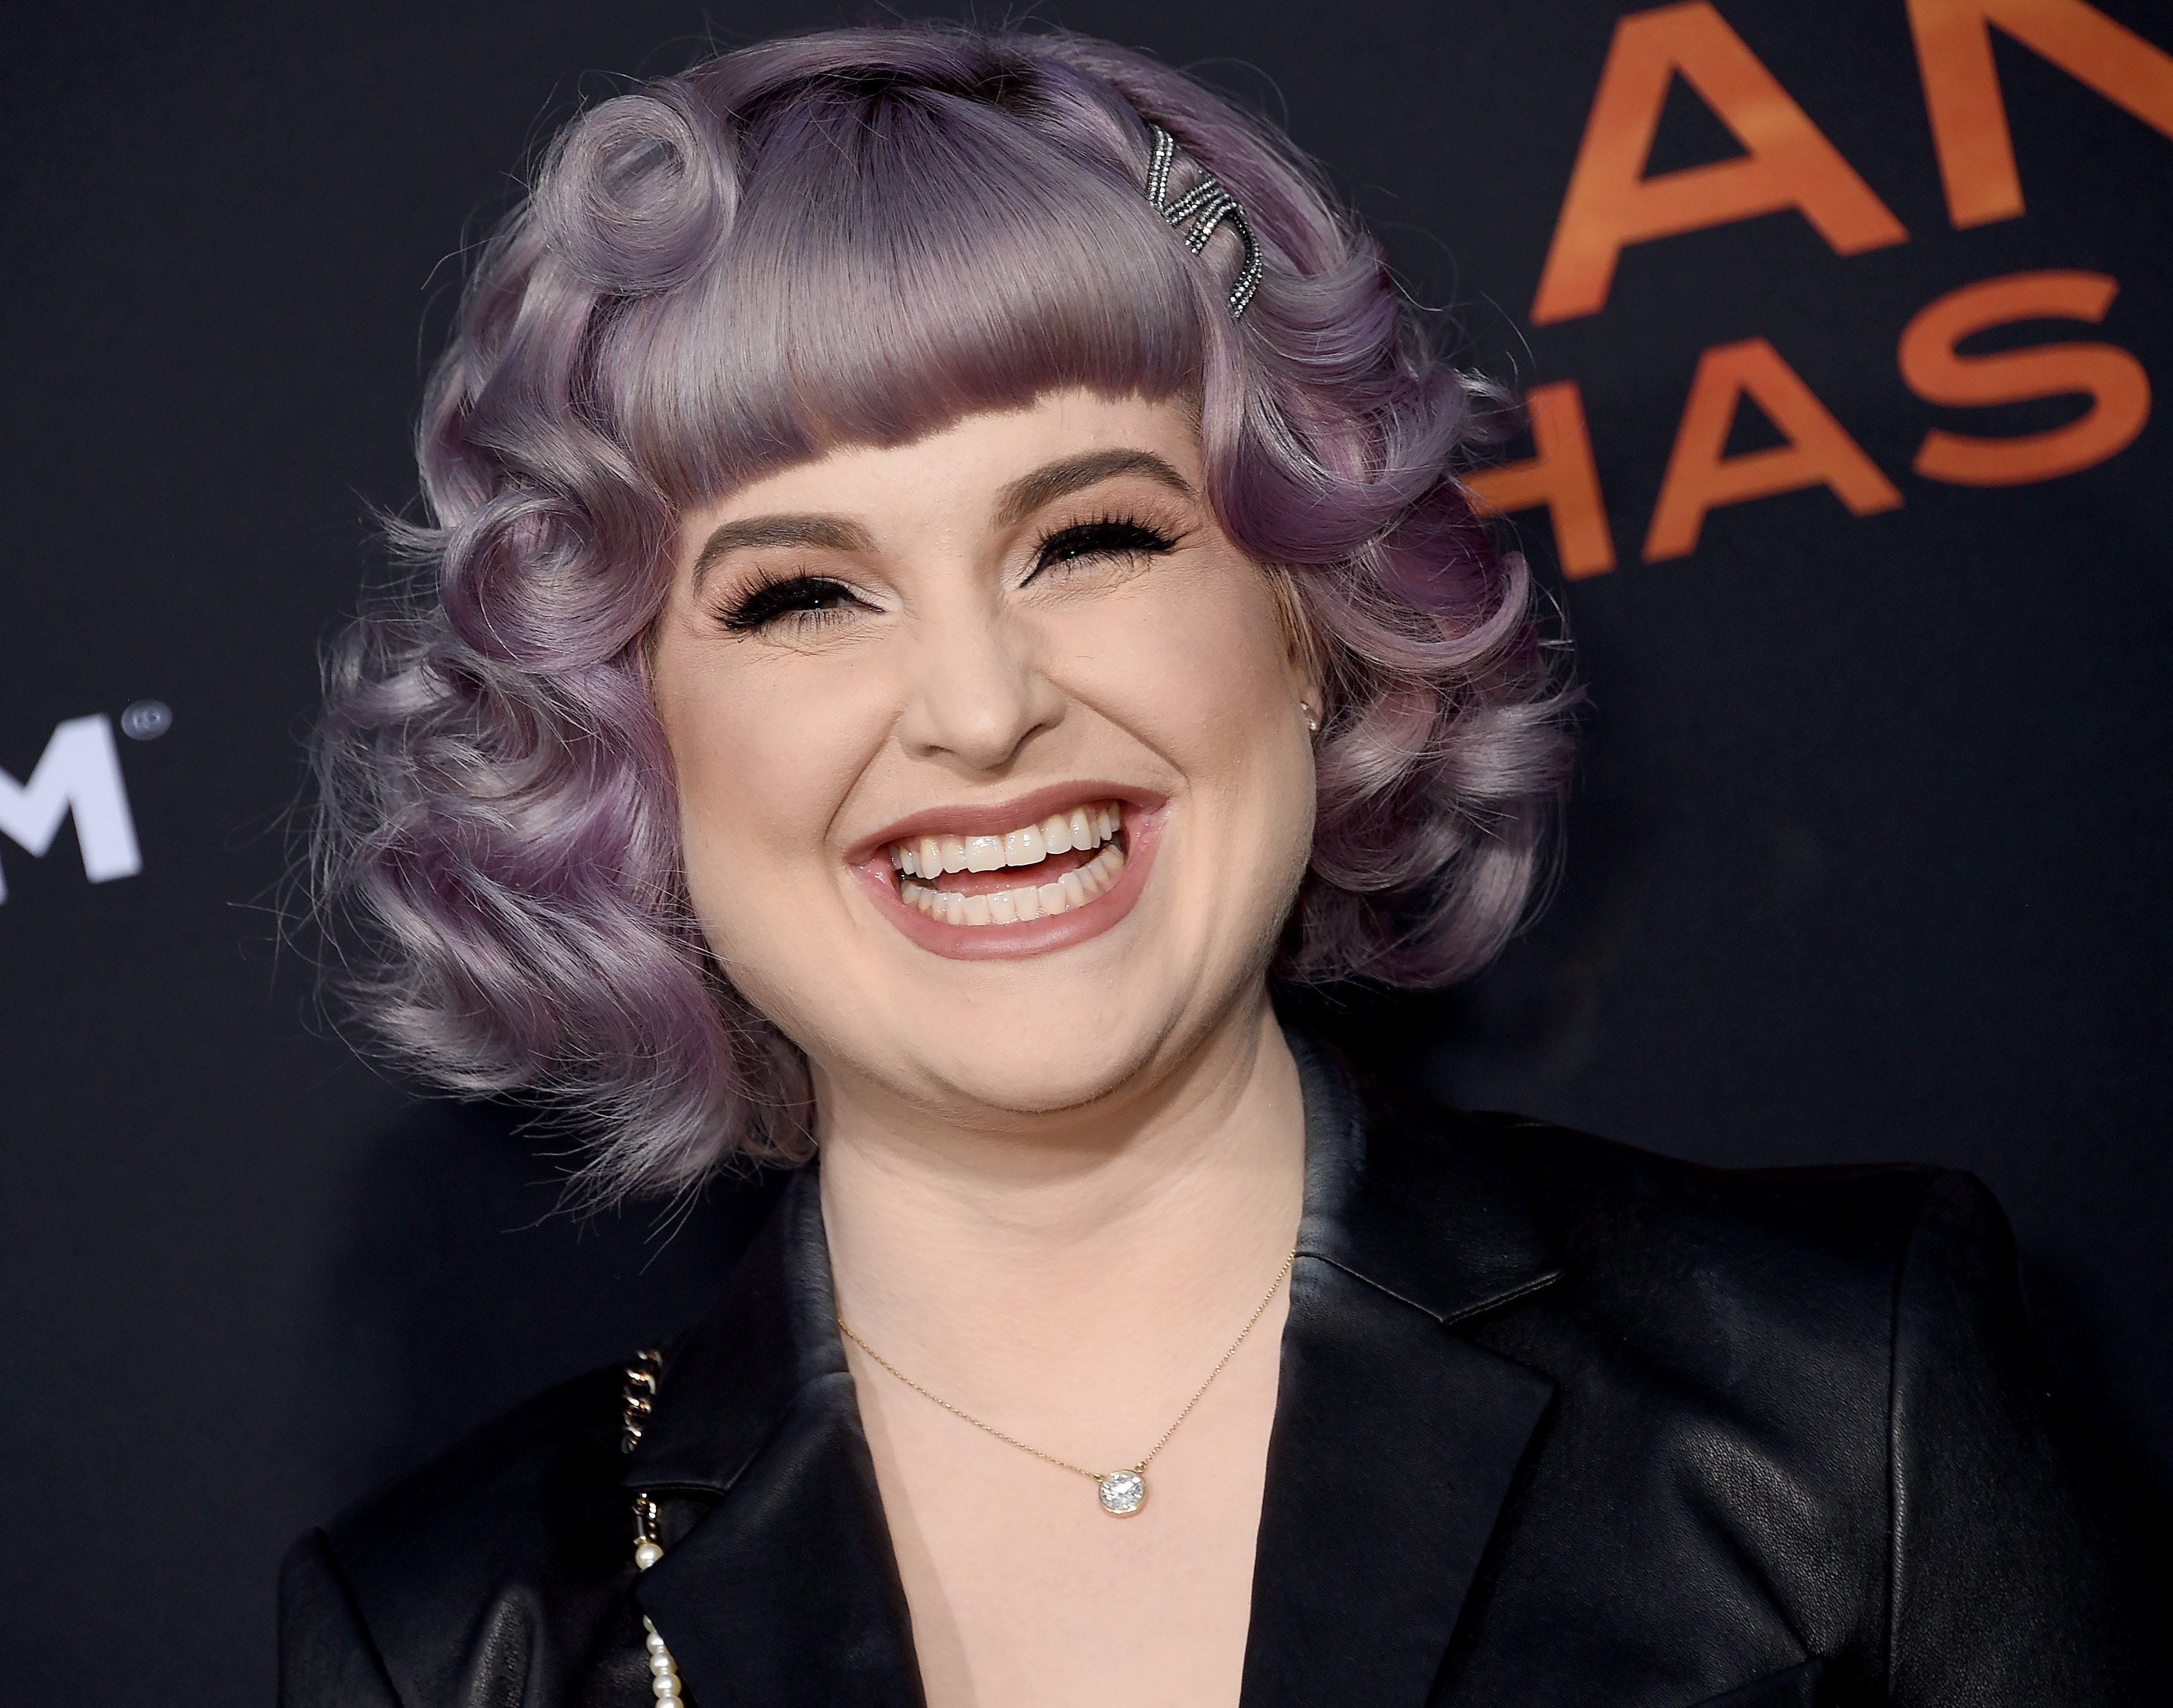 Kelly Osbourne arrives at the LA premiere of "Angel Has Fallen" at Regency Village Theatre on August 20, 2019 in Westwood, California ┃Source: Getty Images